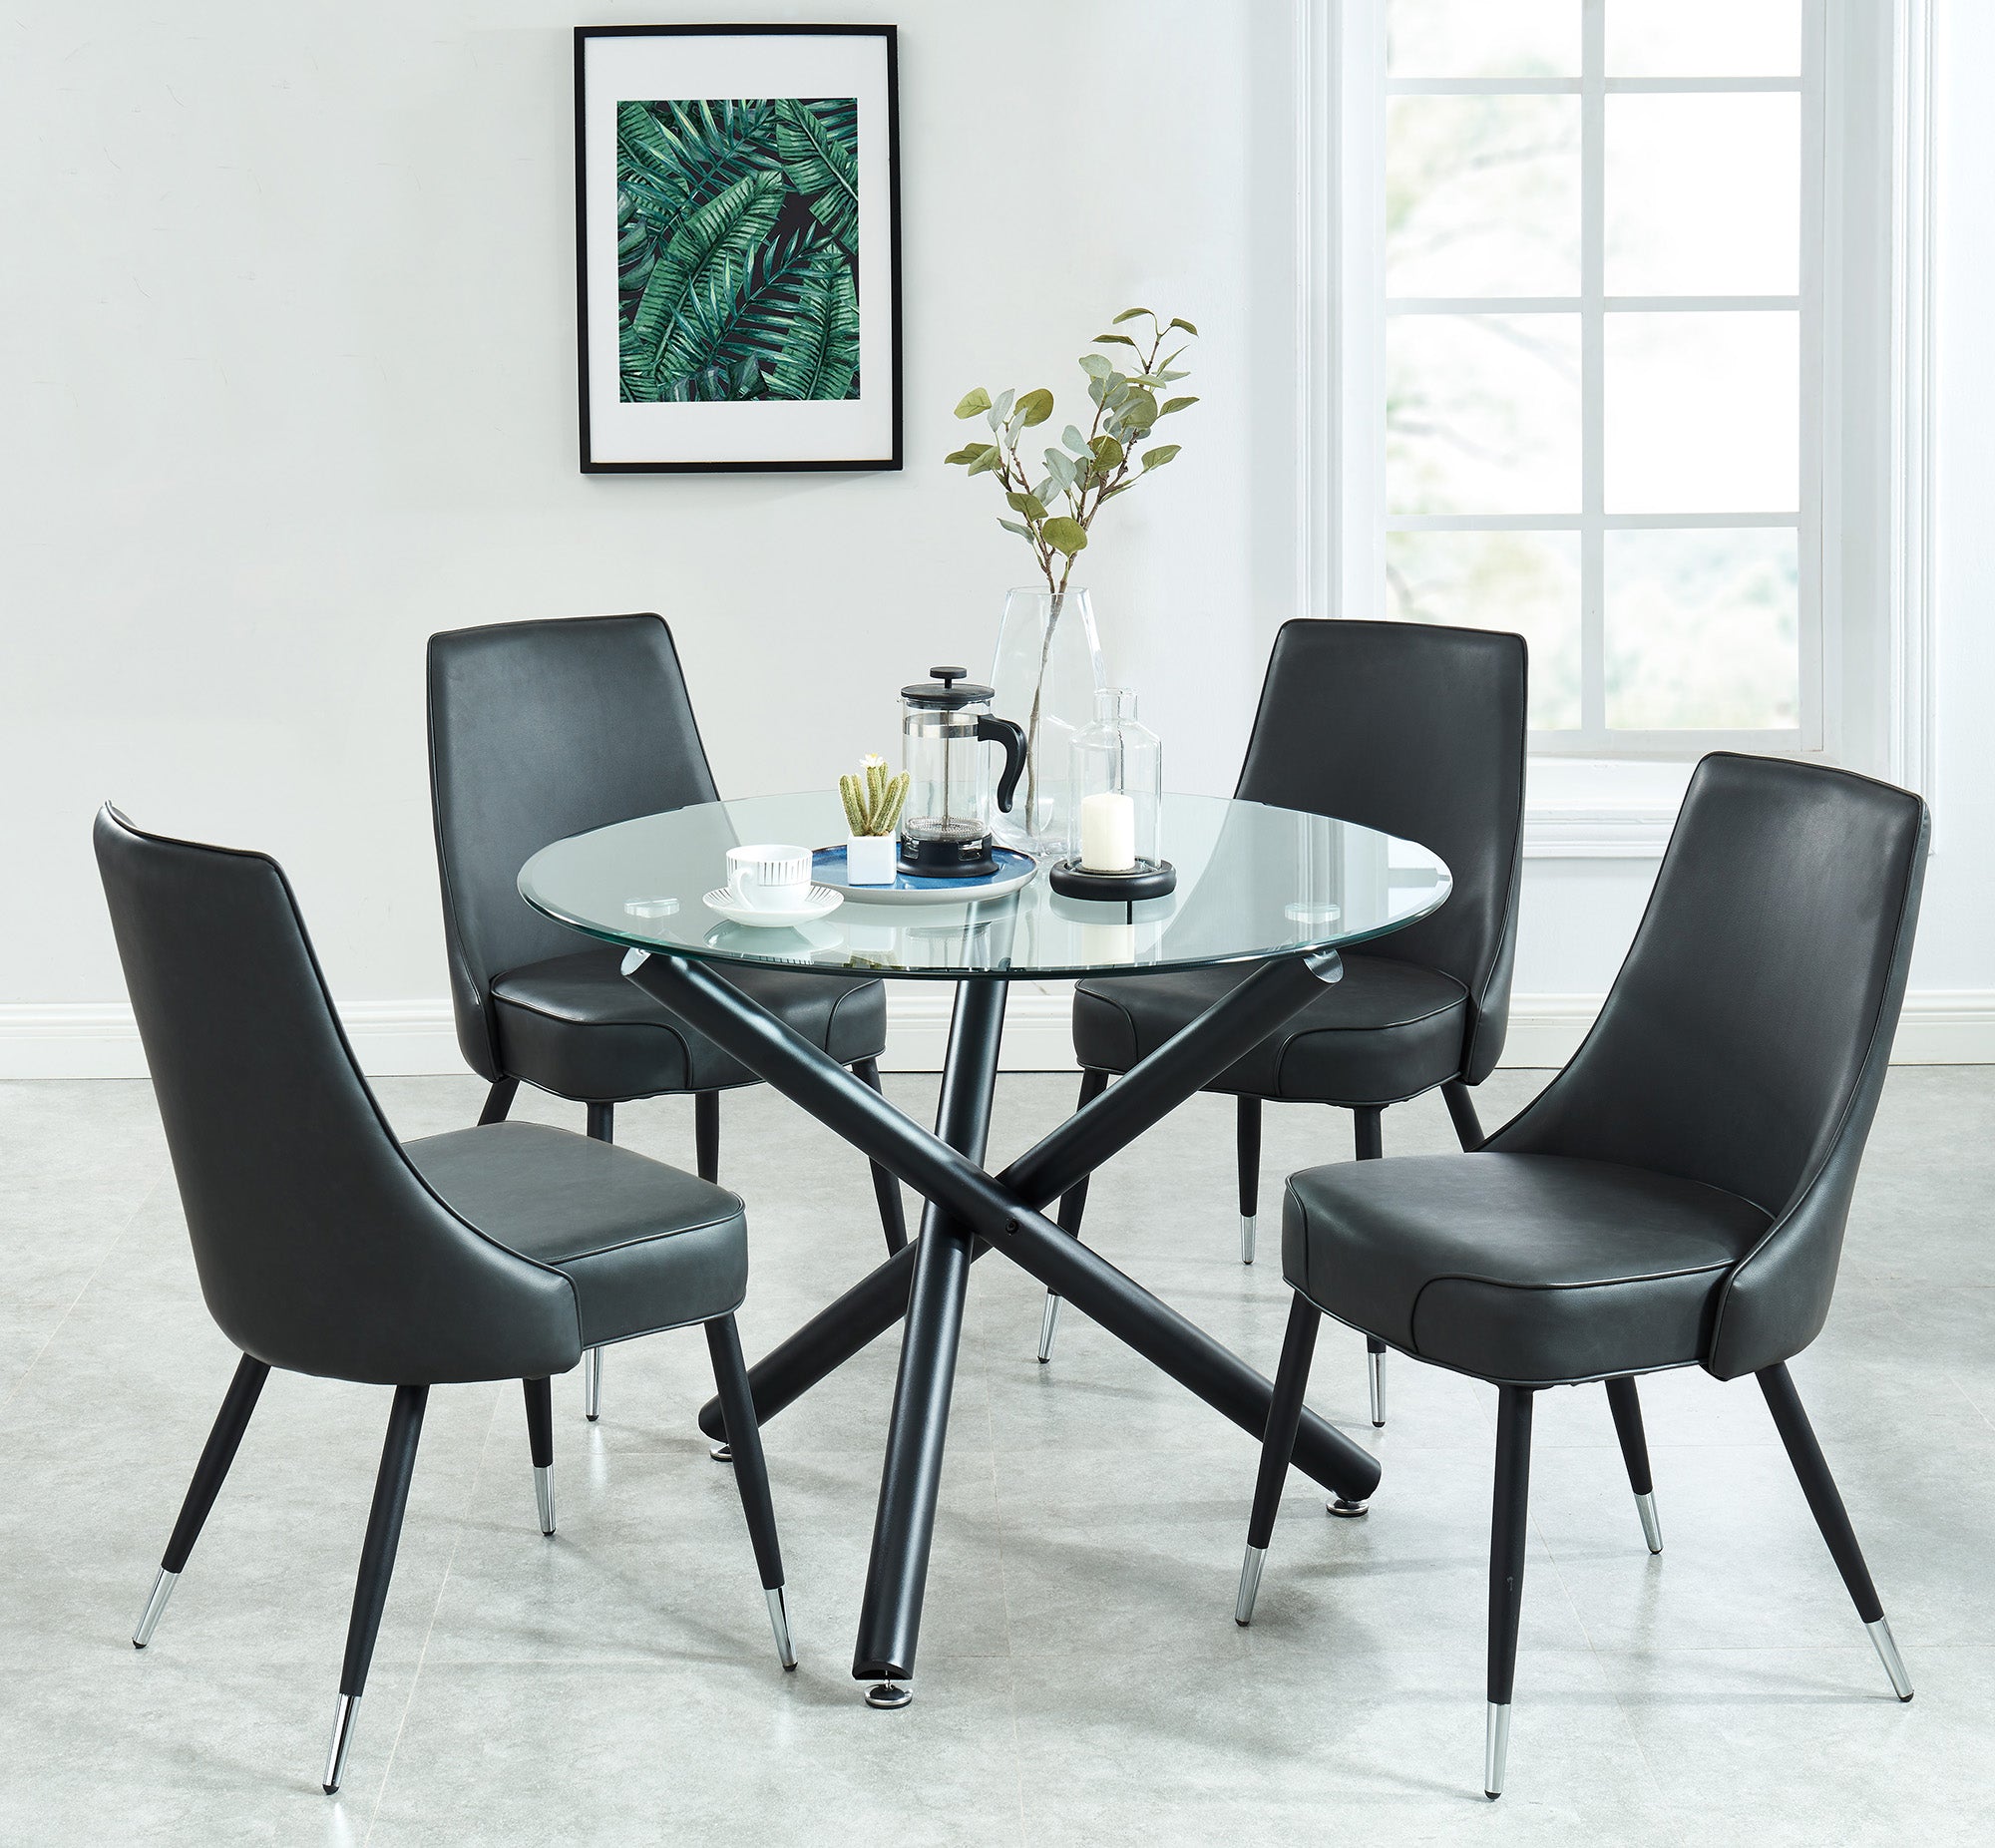 SUZETTE-DINING TABLE, 40"dia-BLACK / SILVANO GREY CHAIRS -5C DINING SET